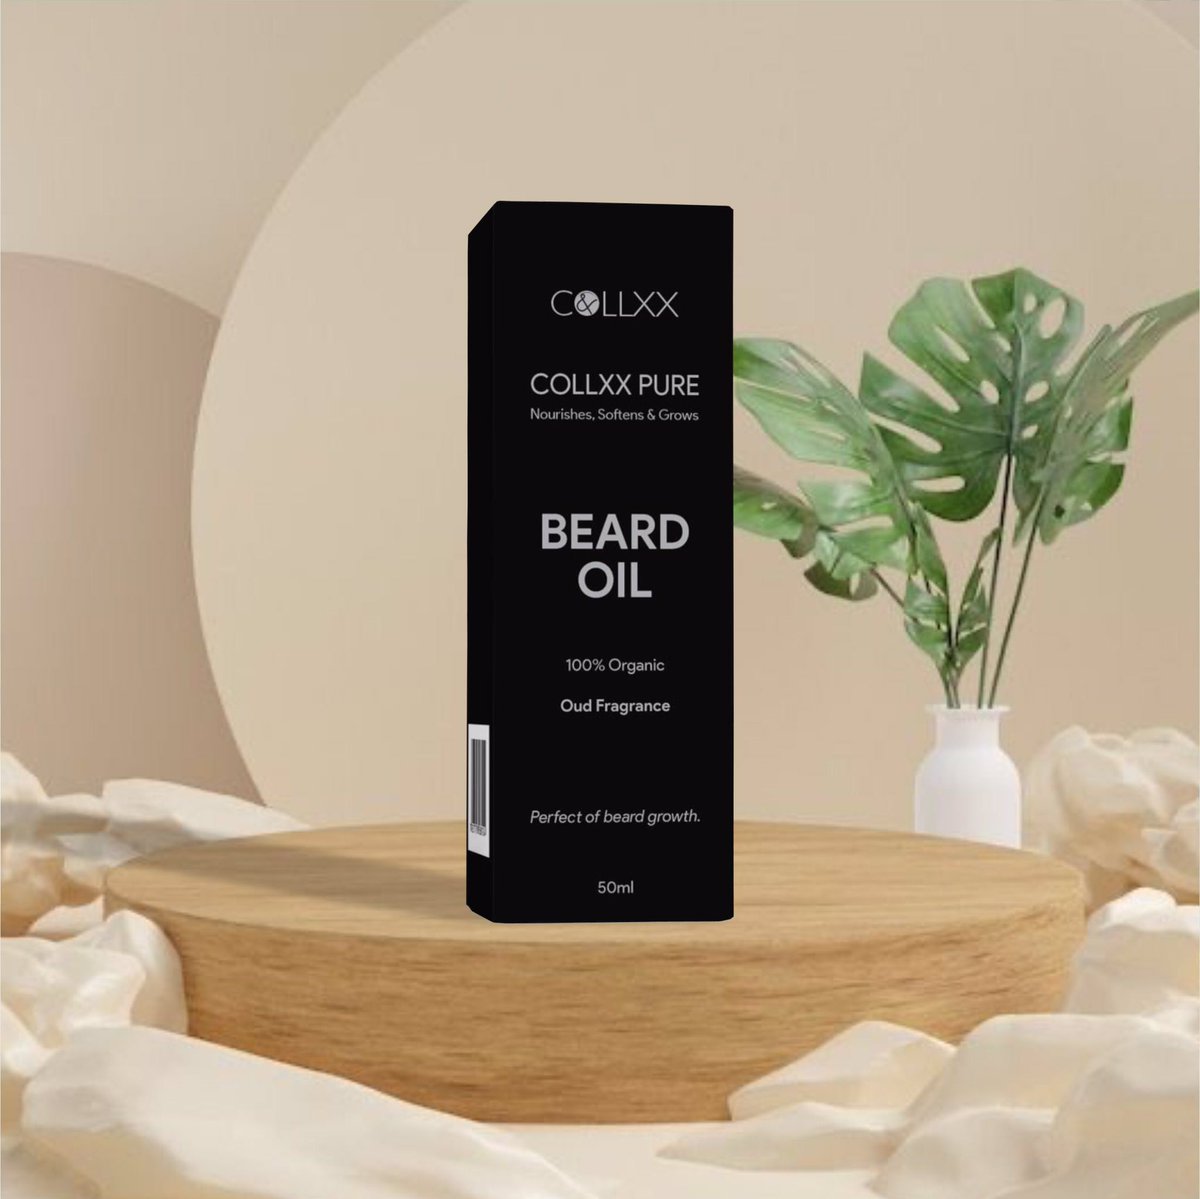 You don't need to be worried anymore about the slow growth of your beard. 

Collxx pure Beard oil, your secret to a bold, confident look. ✅

👉🏻 Oud fragrance 
👉🏻 Worldwide delivery 

To place your order, visit collxxpure.com